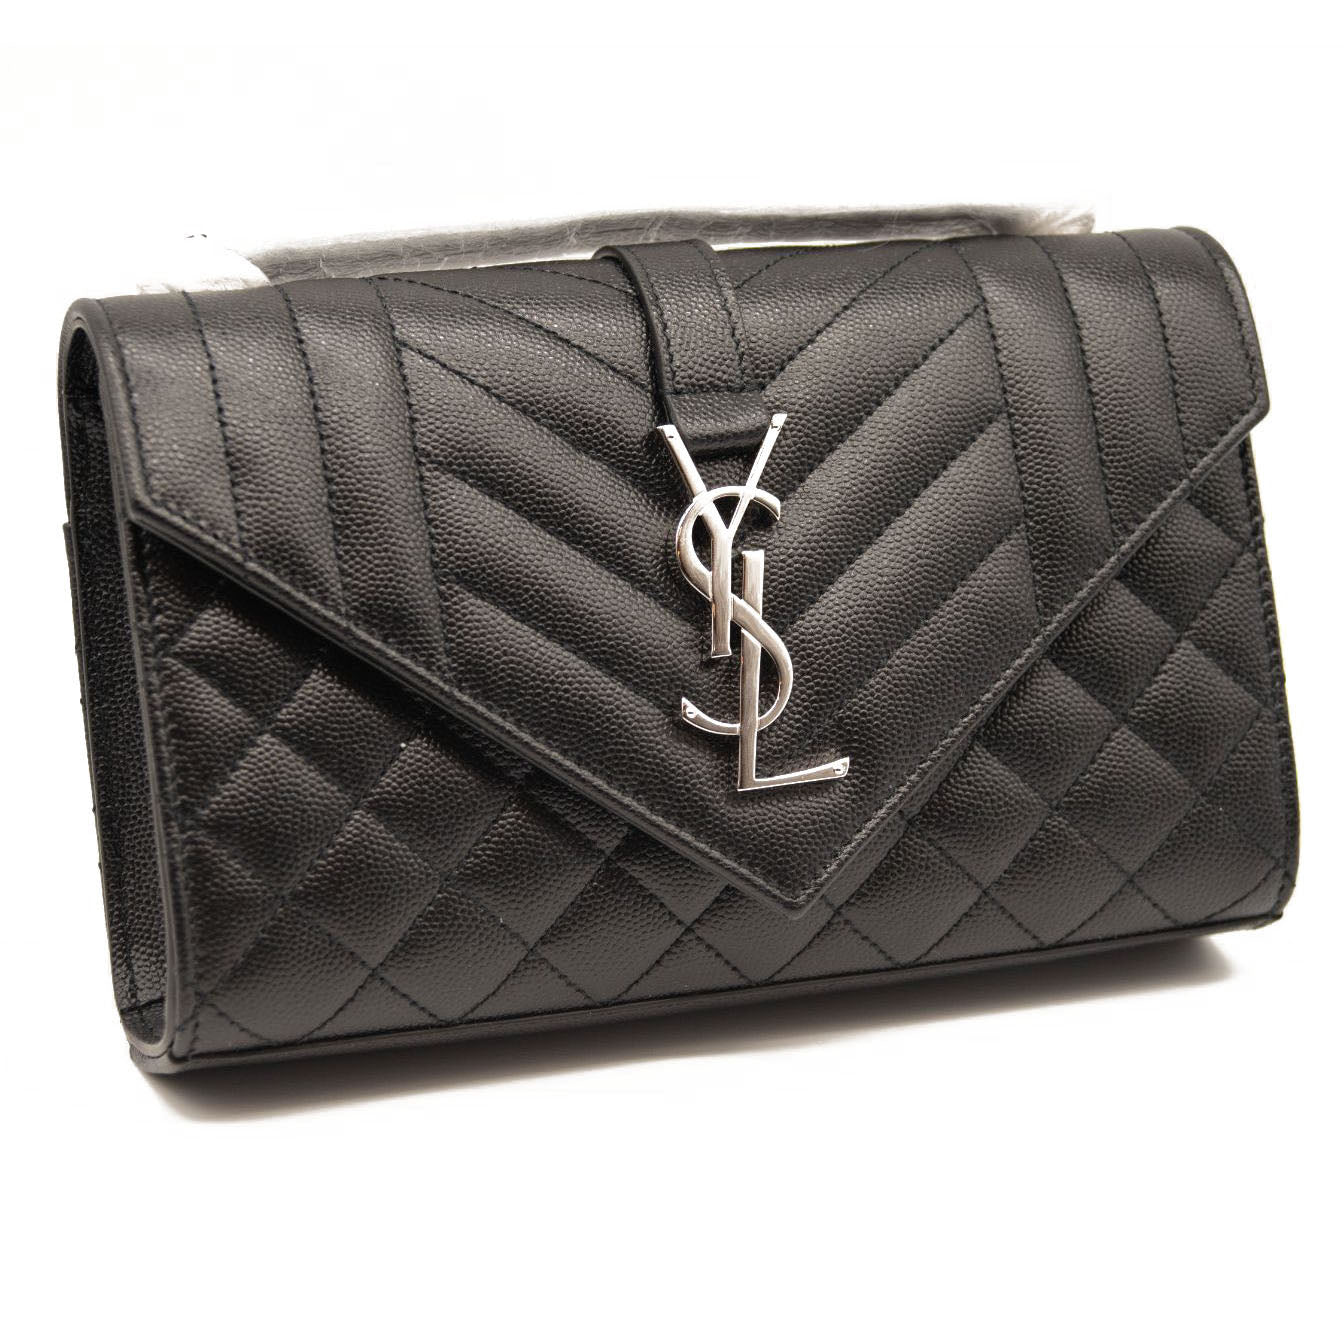 Saint Laurent - Circle Quilted Textured-leather Bag - Black